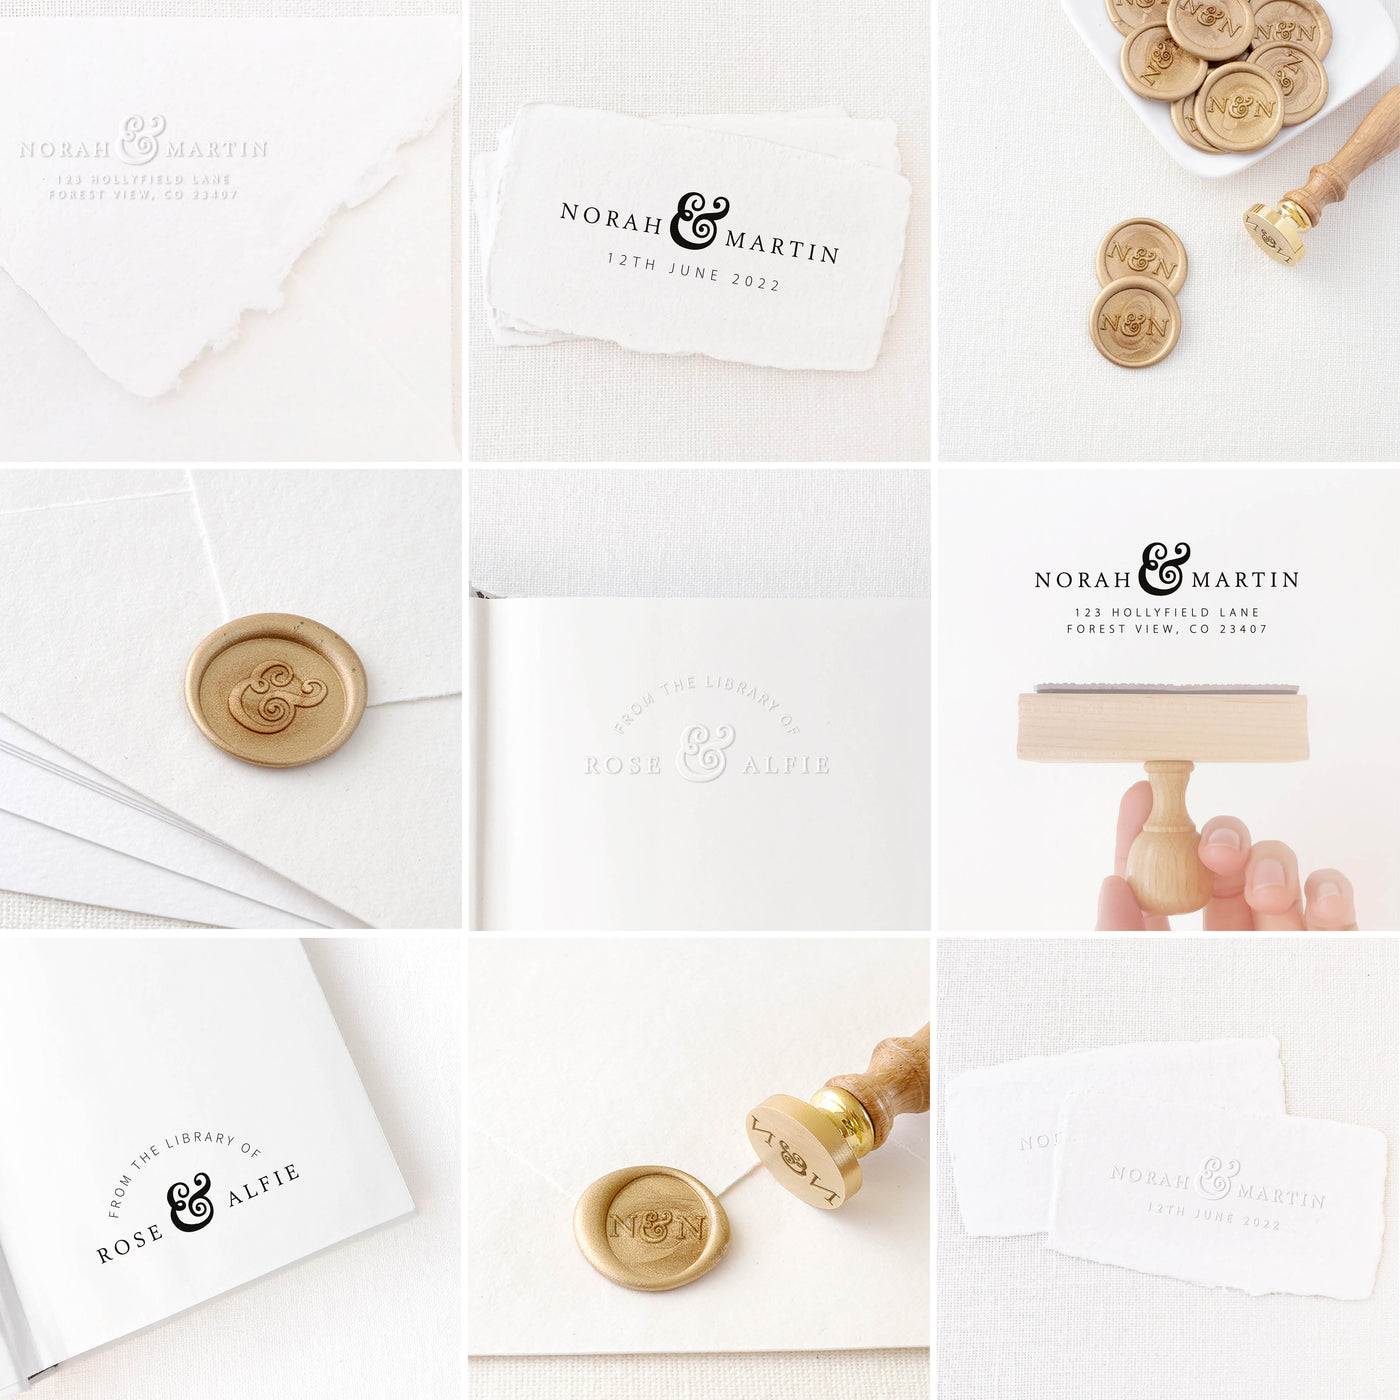 Georgina Classic Collection |Custom Rubber Stamp, Wax Seal Stickers & Embosser for Custom Luxe Embellishment Packaging & Fine Art Wedding Stationery Invitations | Heirloom Seals